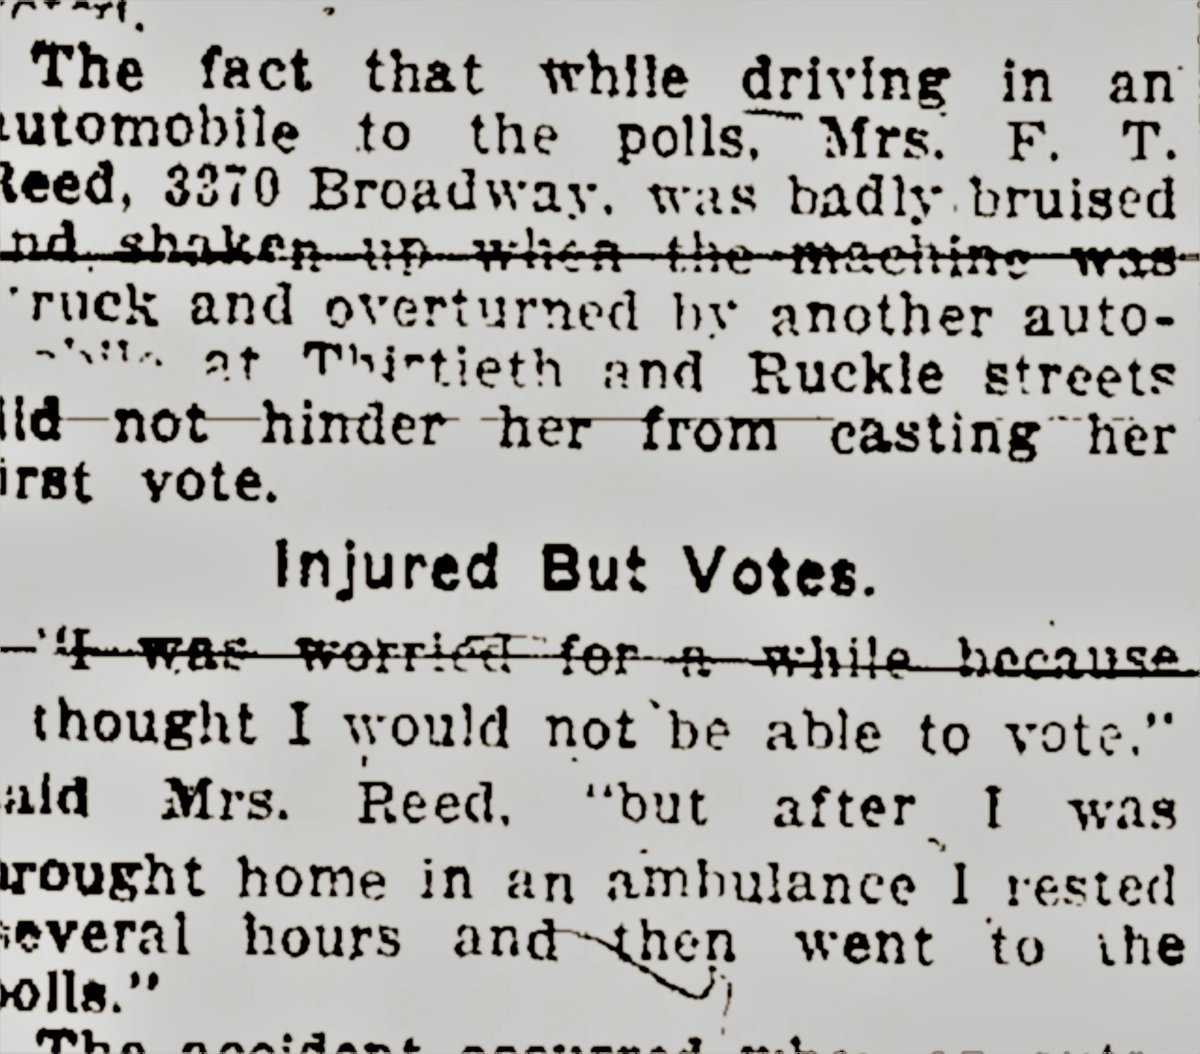 First-time voter Nina Reed was rear-ended at 30th & Ruckle on her way to vote. Her car flipped on its side and she was taken home by ambulance. She rested several hours before returning to the polls, & although badly bruised, told  @indystar that she felt much better after voting